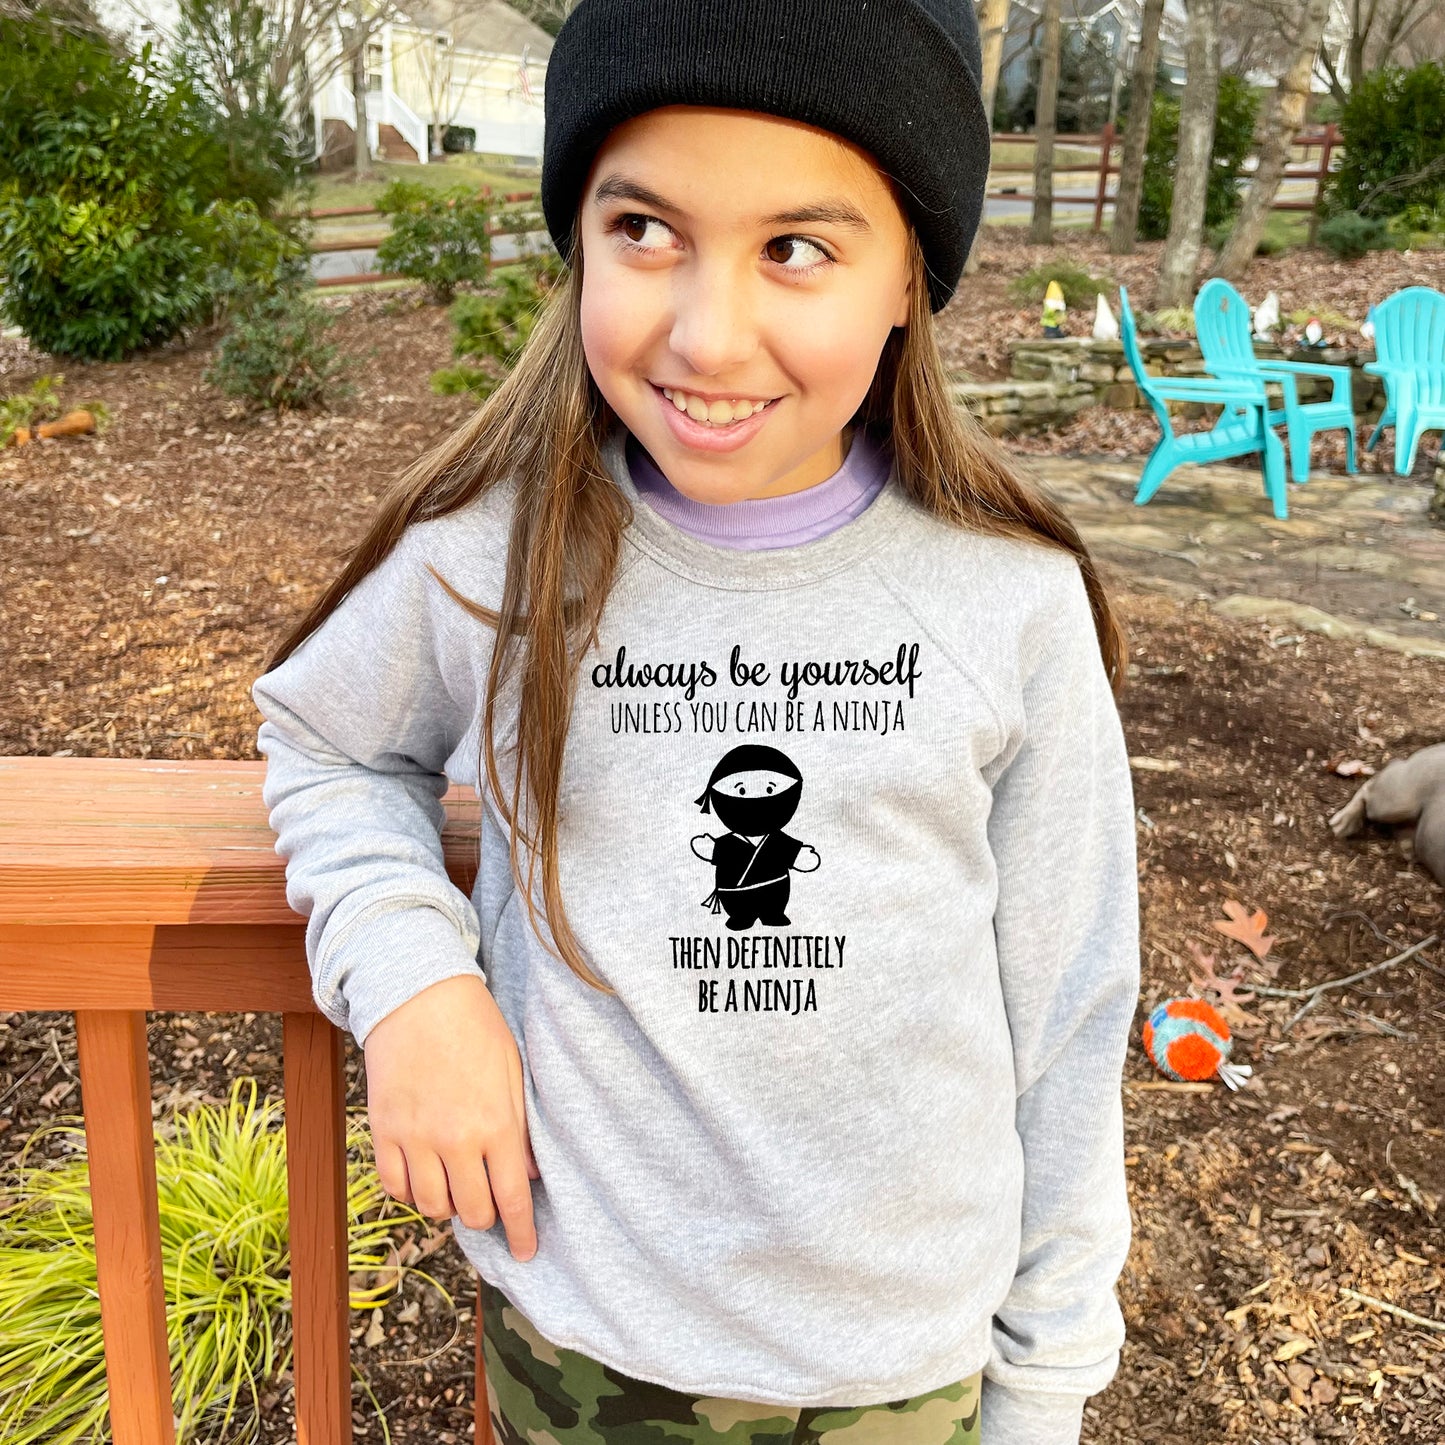 Always Be Yourself Unless You Can Be A Ninja, Then Definitely Be A Ninja - Kid's Sweatshirt - Heather Gray or Mauve